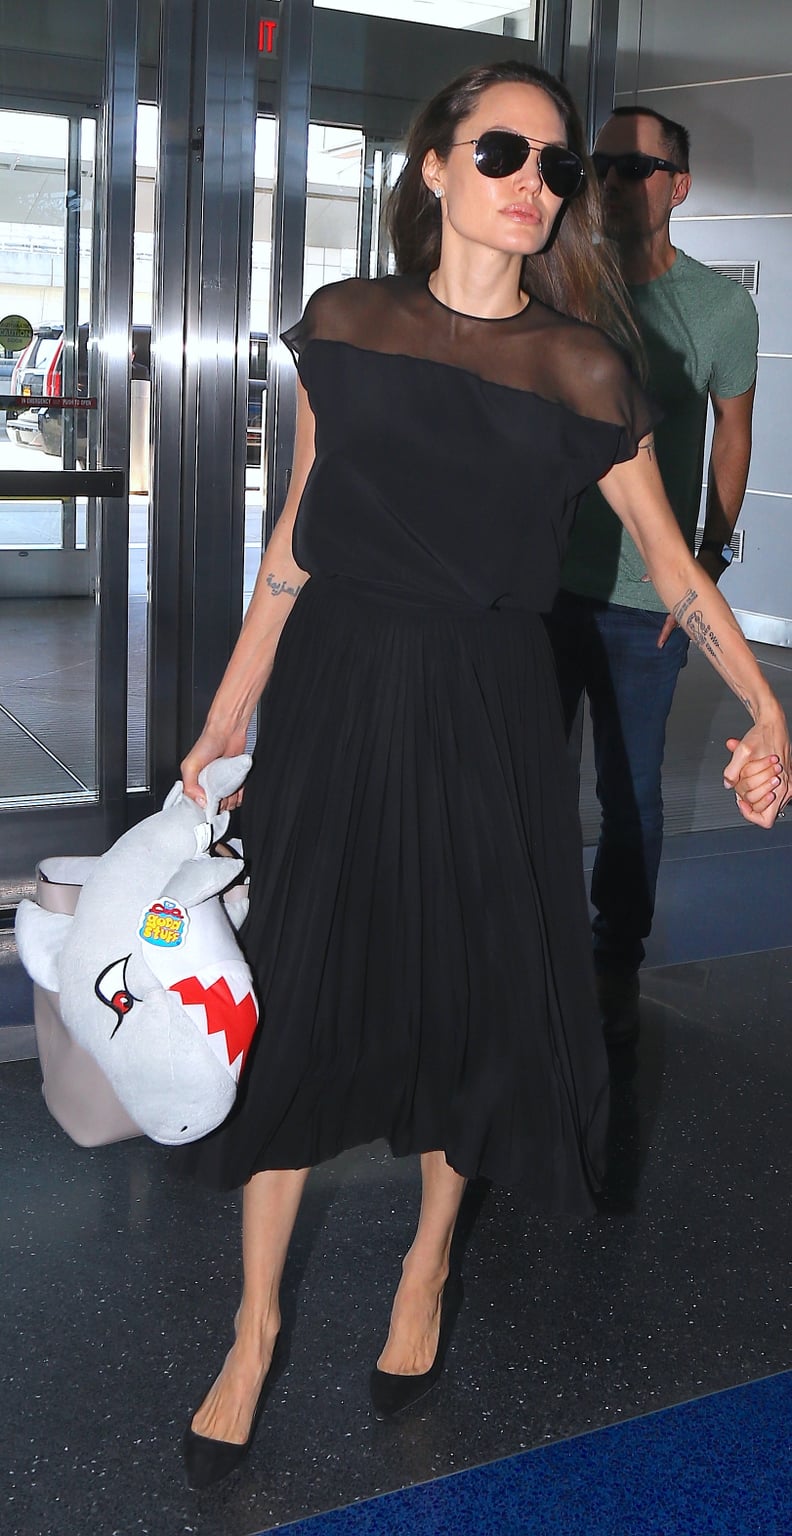 Angelina Wore a Midlength Black Dress to the Airport When Leaving NYC